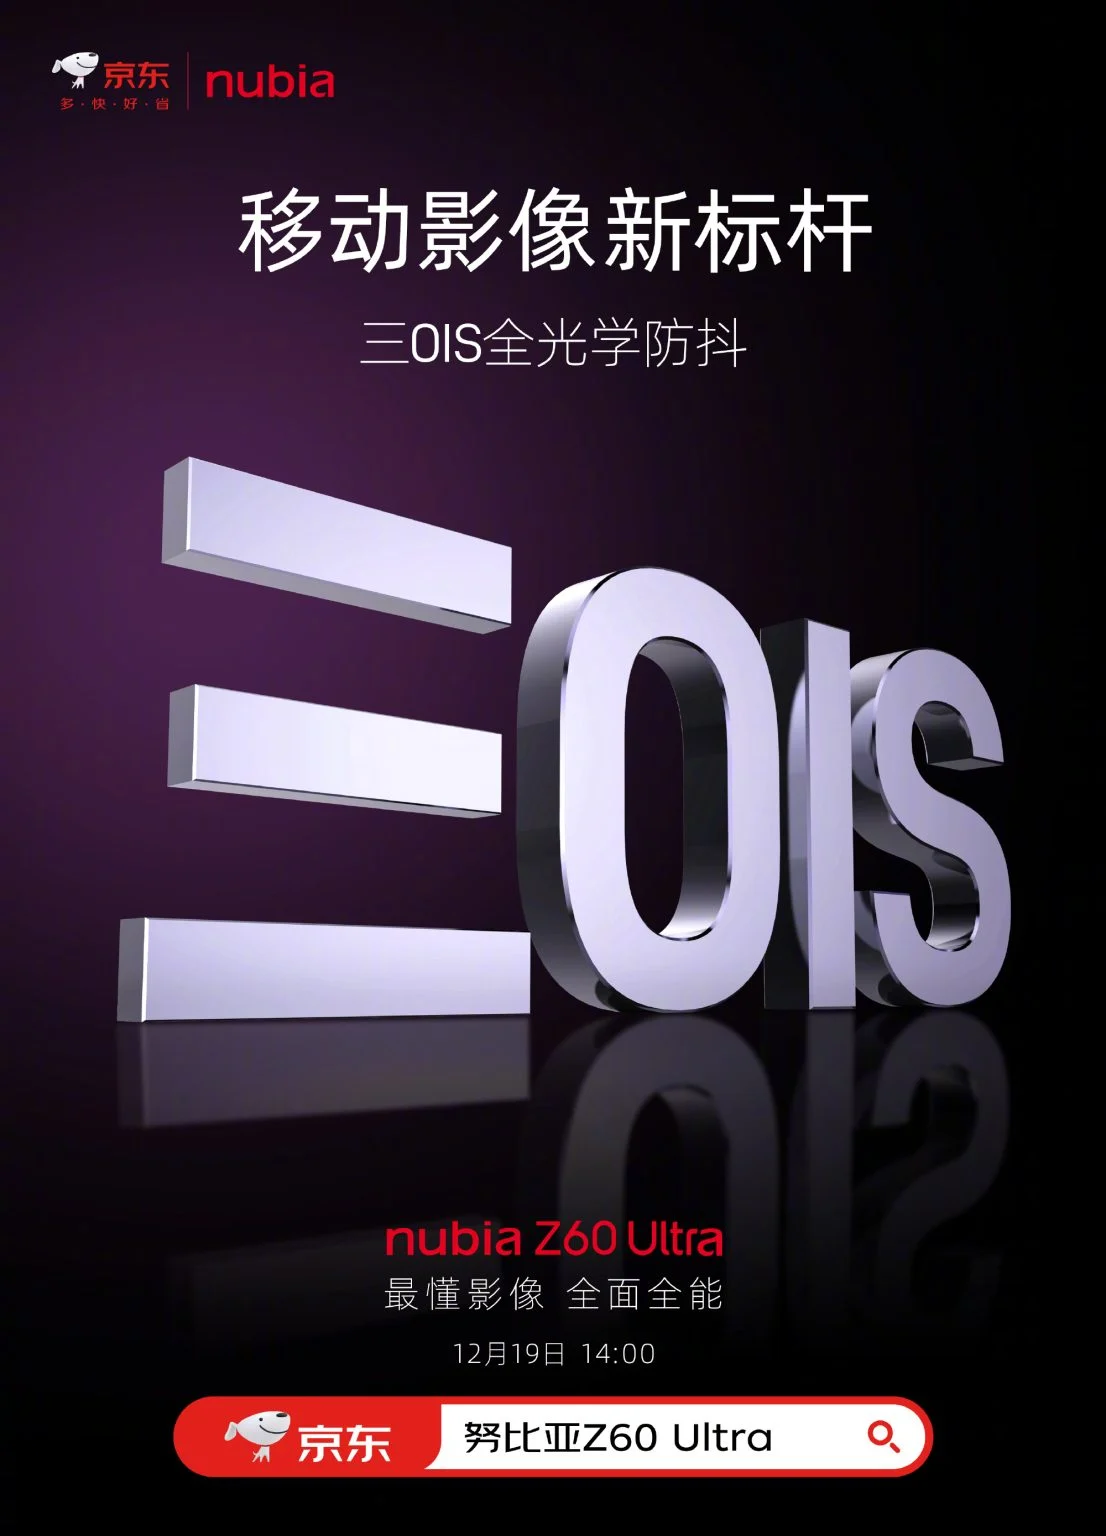 Nubia Z60 Ultra will have OIS support for all three cameras